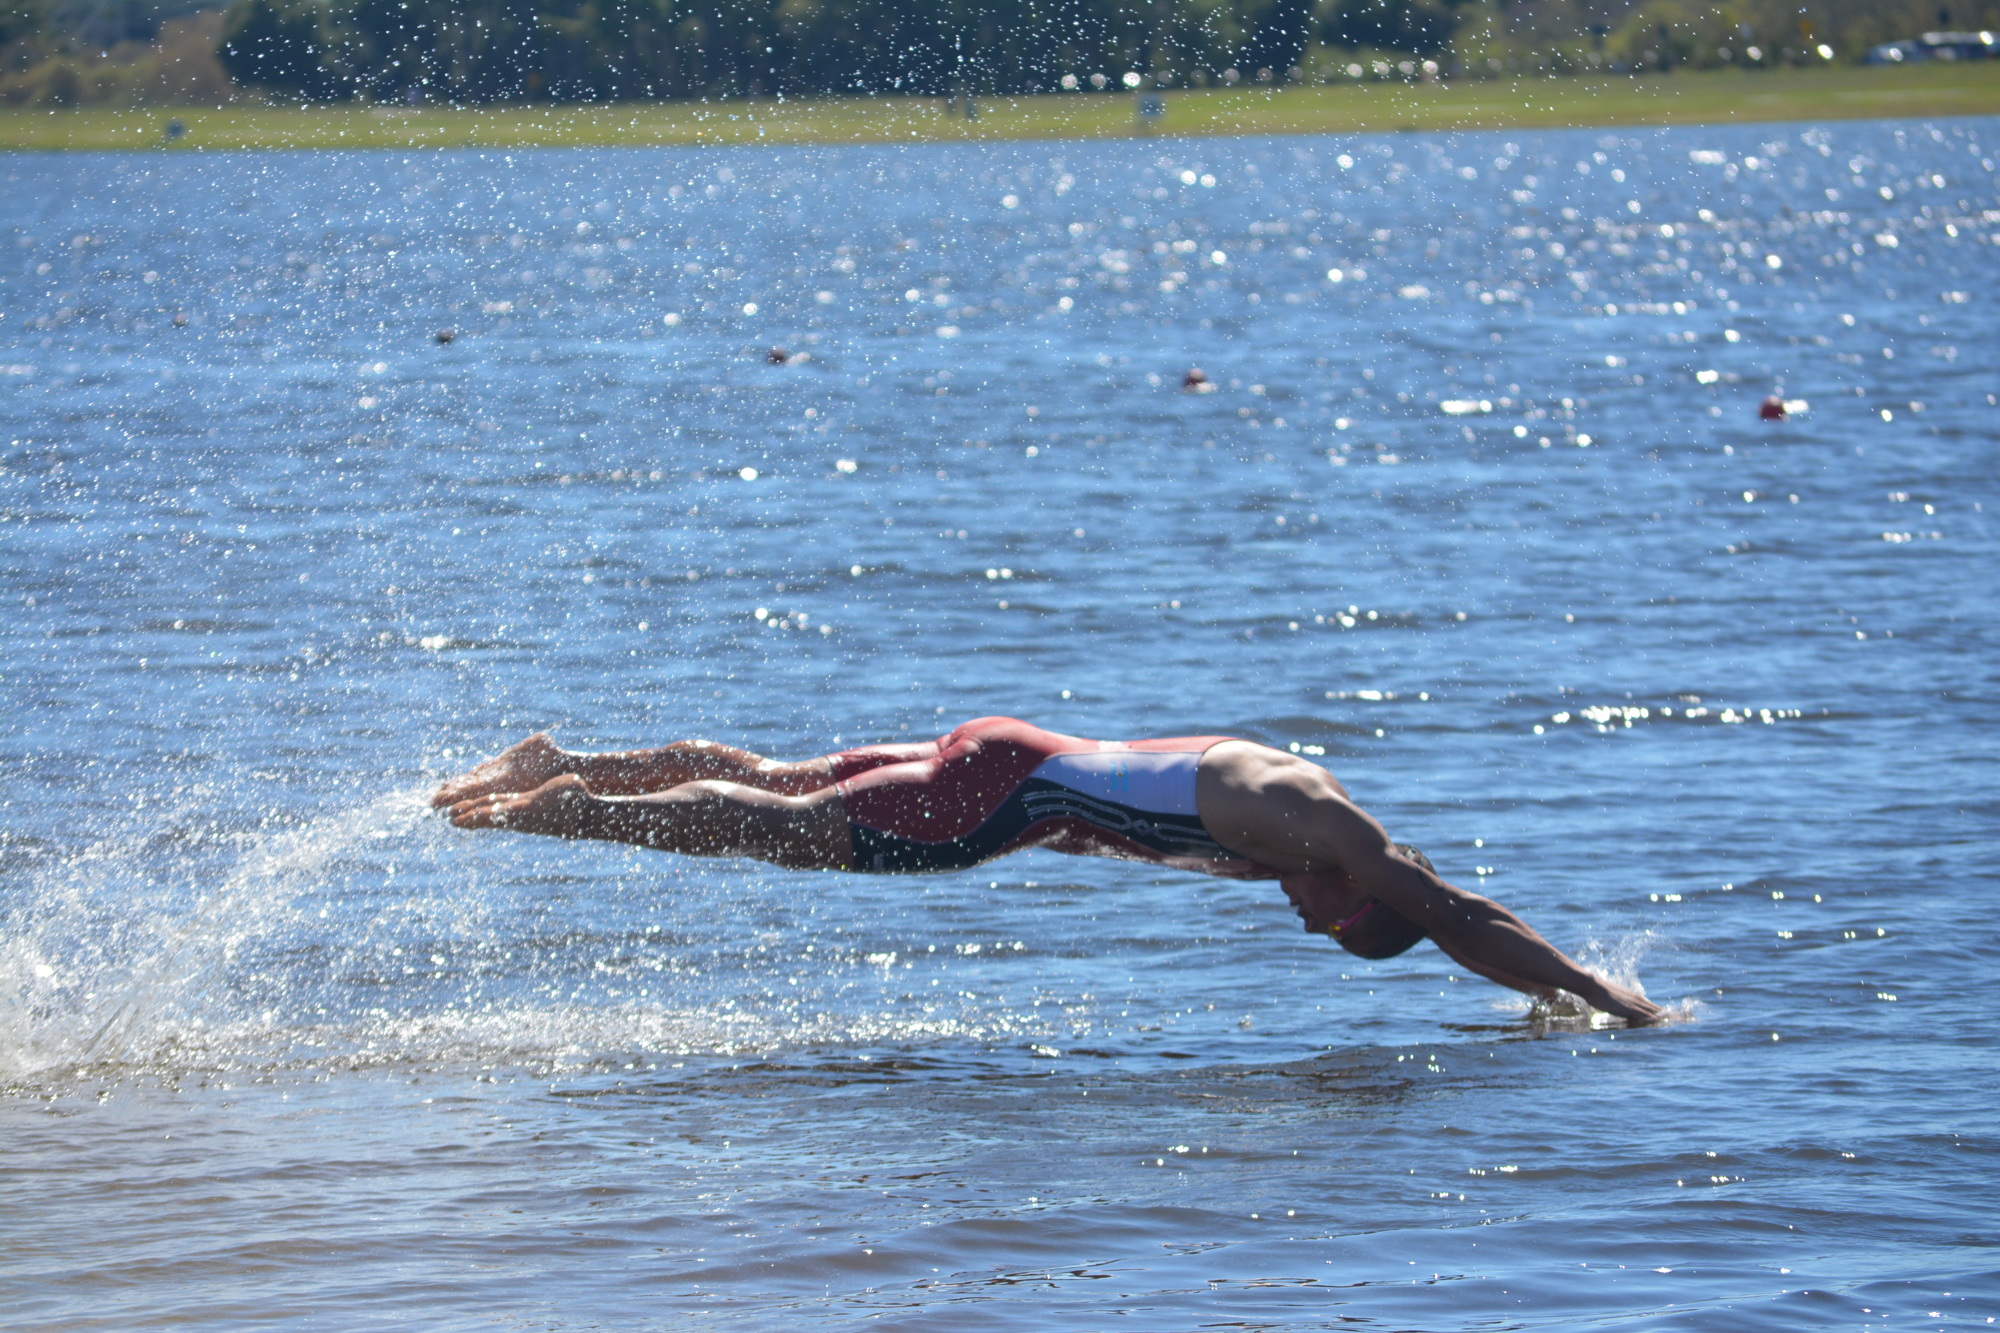 Argentina's Vicente Lima dives into the water at Nathan Benderson Park during the 2016 Biathle/Triathle World Championships' male U-19 triathle event. Lima finished second with a time of 15:51.00.